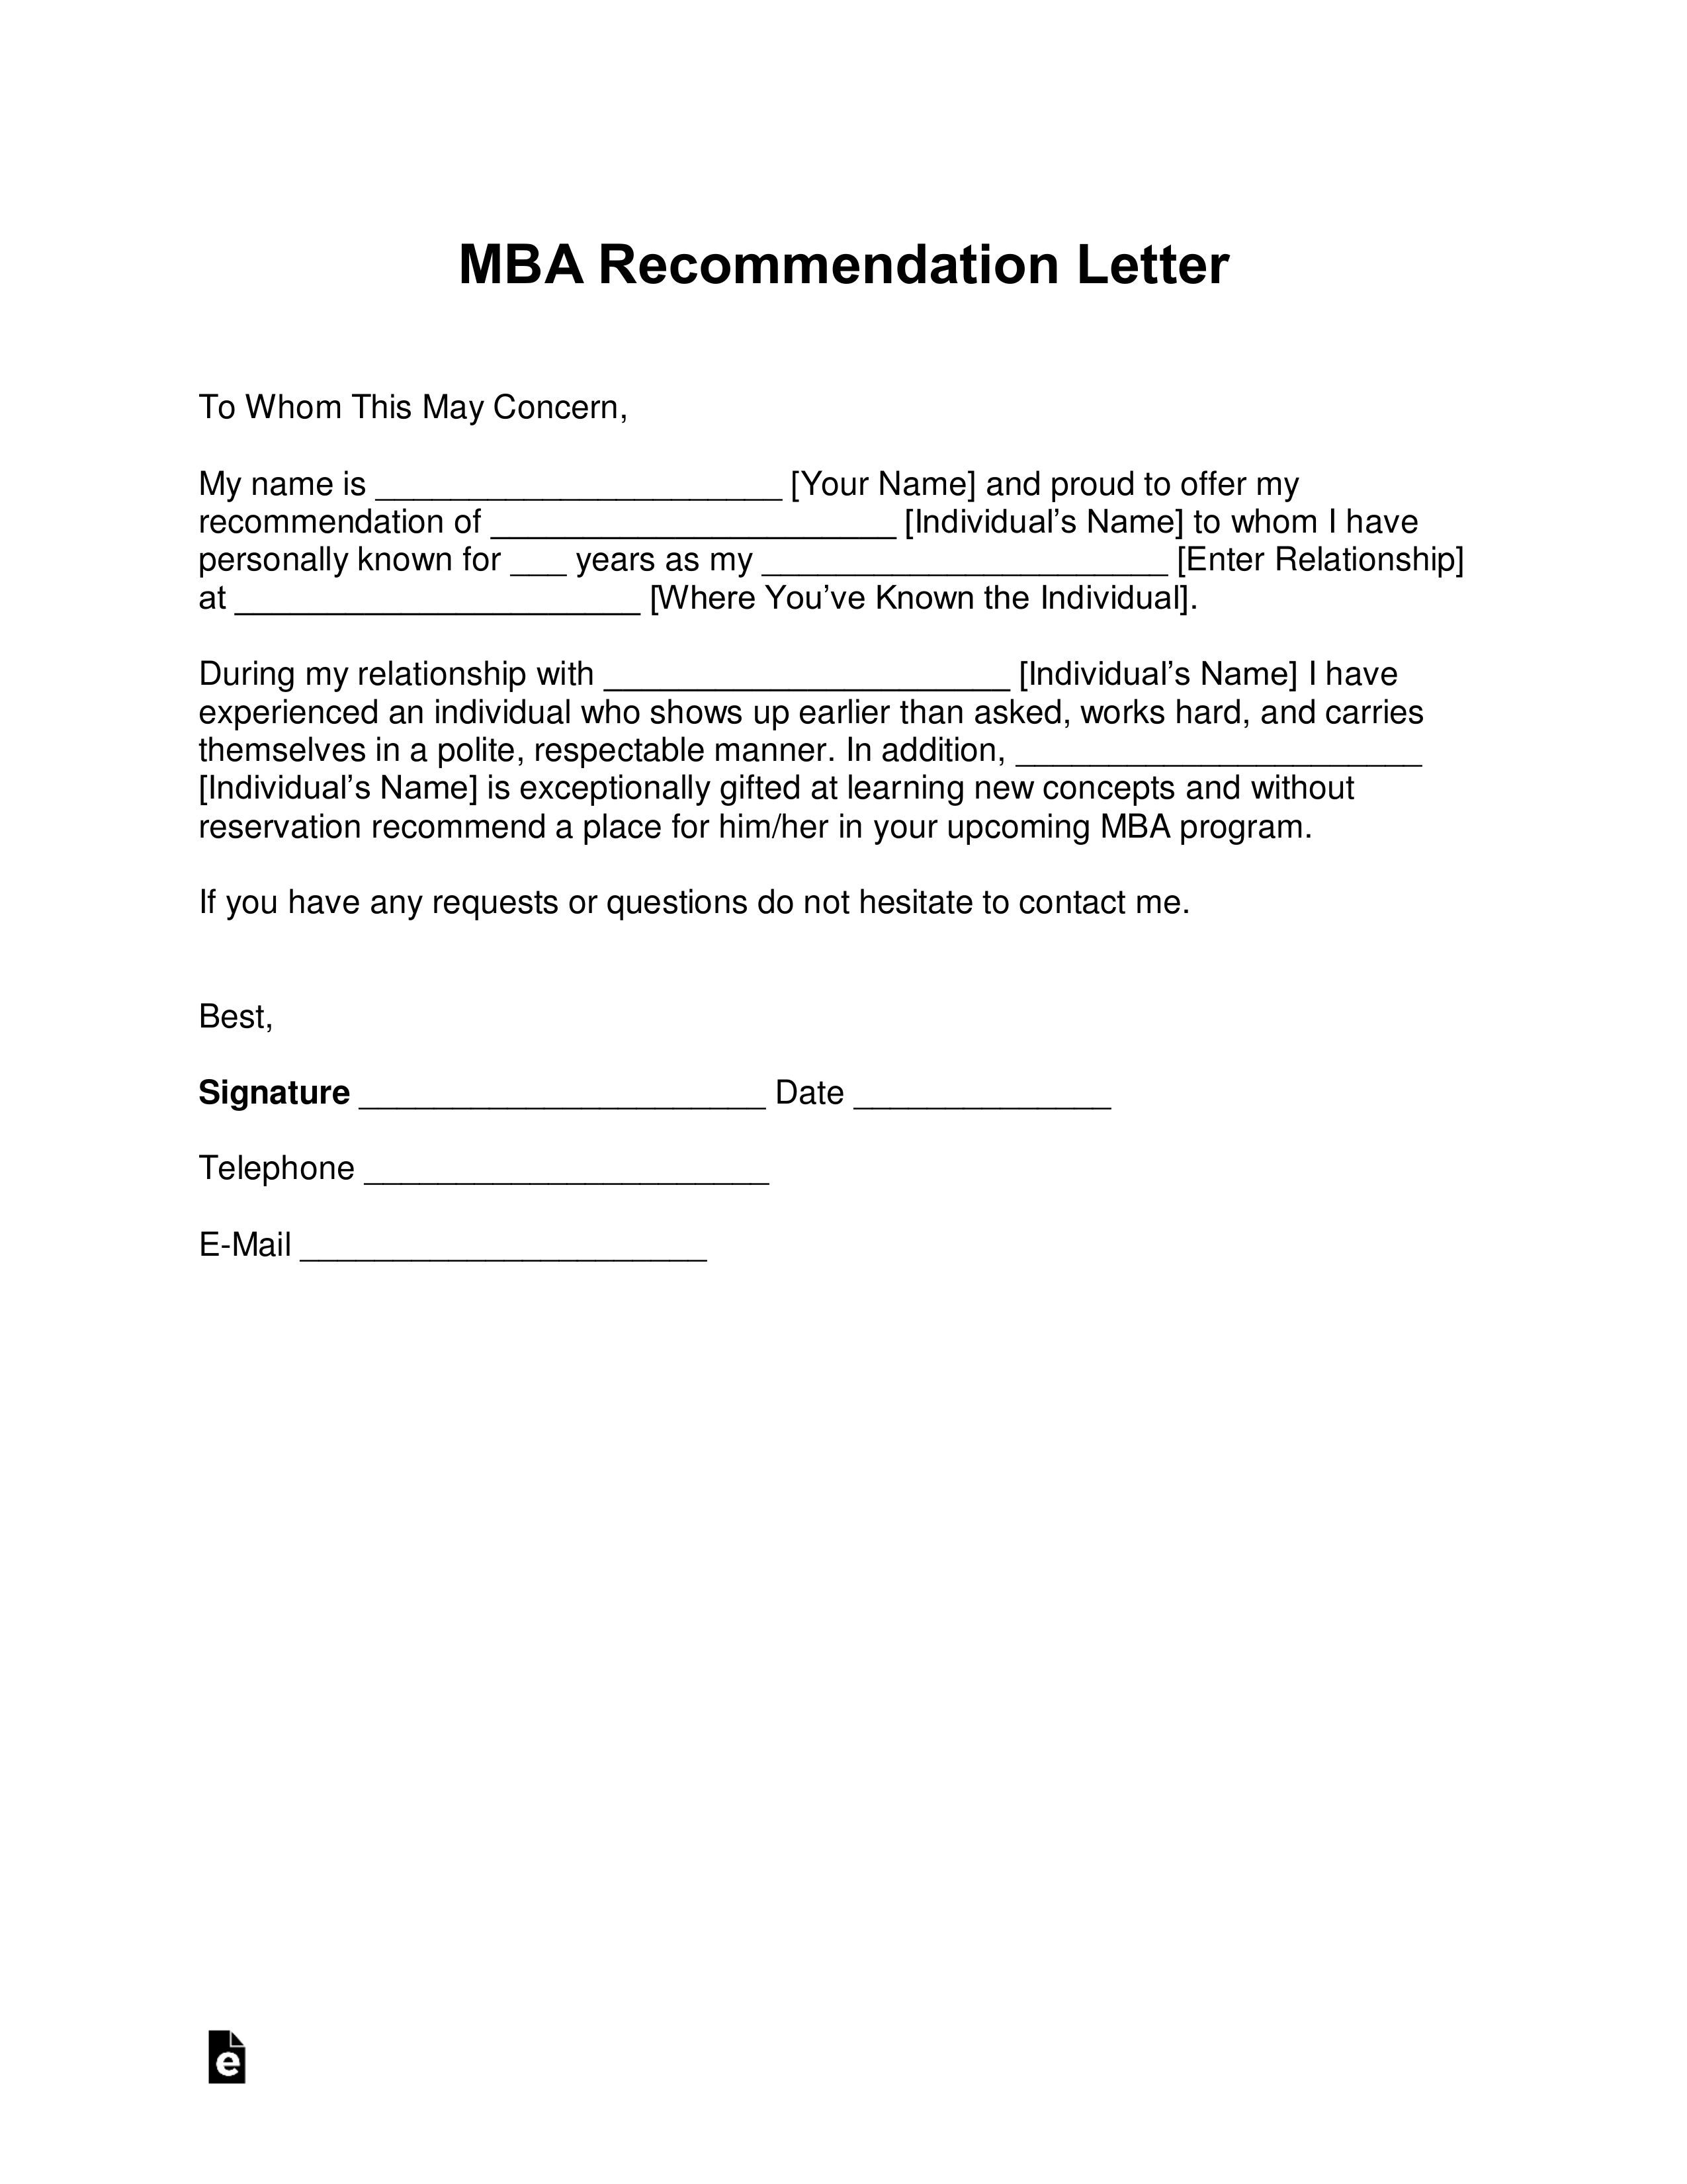 Letter Of Recommendation Samples For Coworker from eforms.com